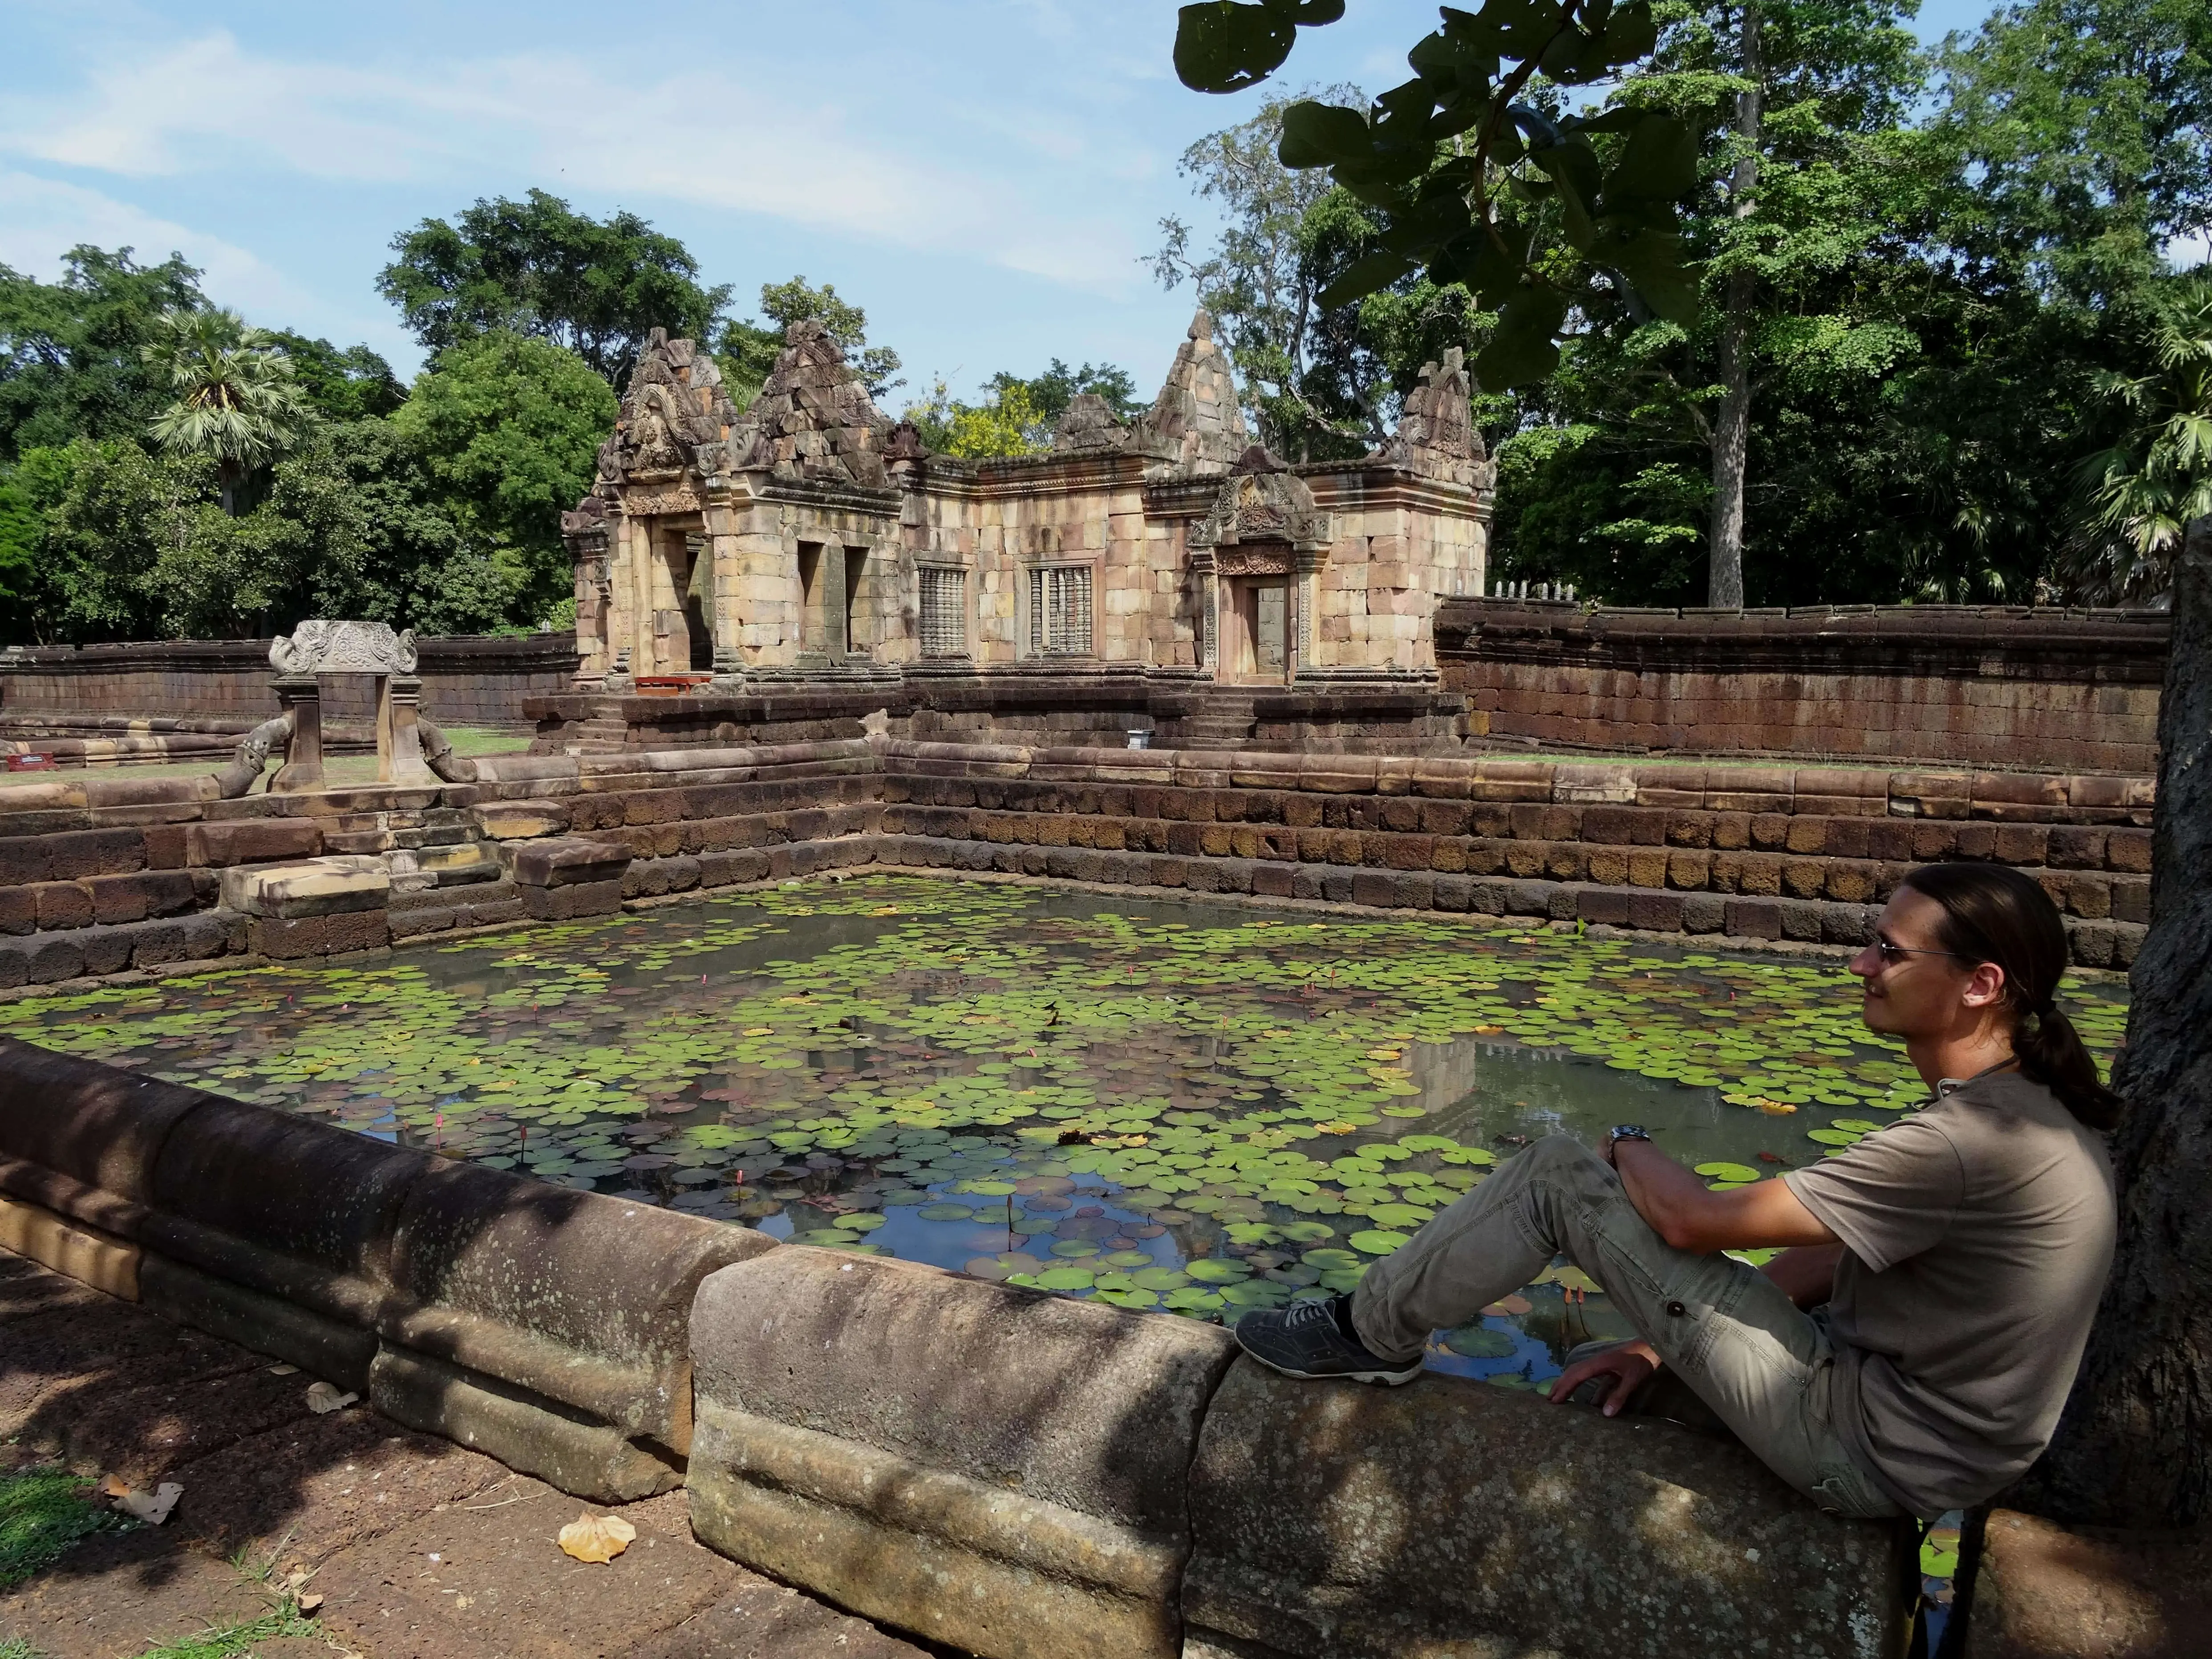 A man sitting next to a pond full of lotus flowers in a ruined temple